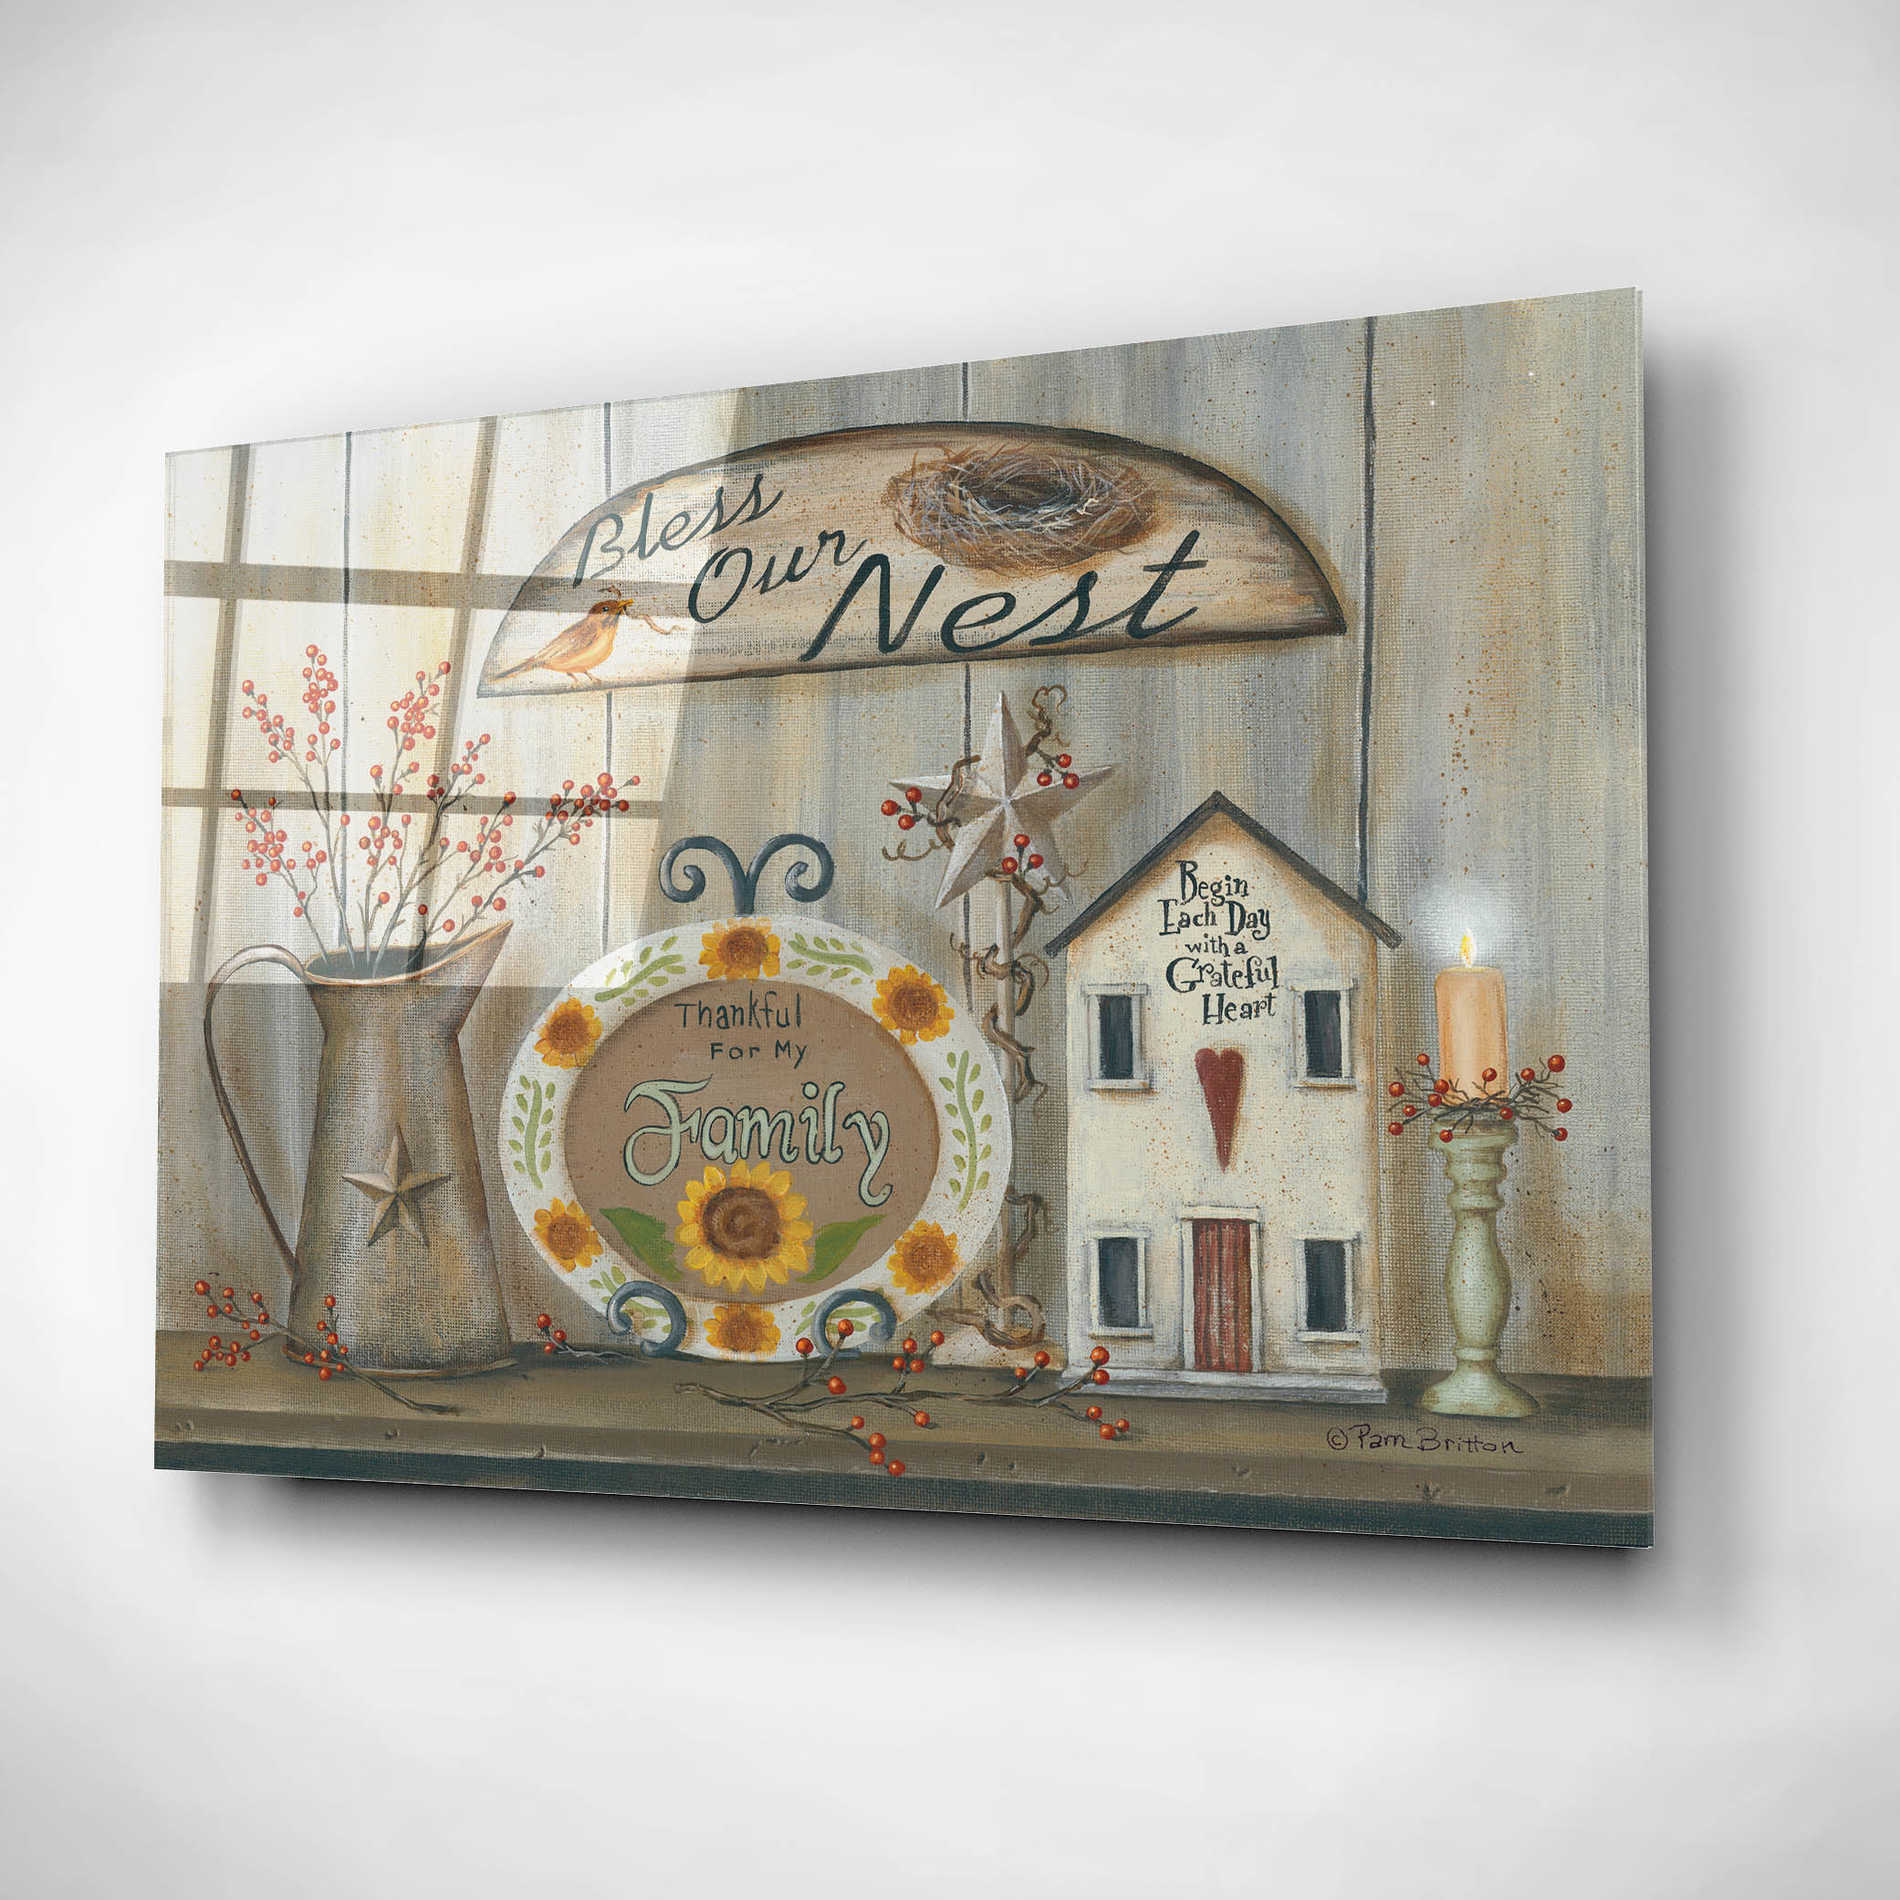 Epic Art 'Bless Our Nest Country Shelf' by Pam Britton, Acrylic Glass Wall Art,16x12